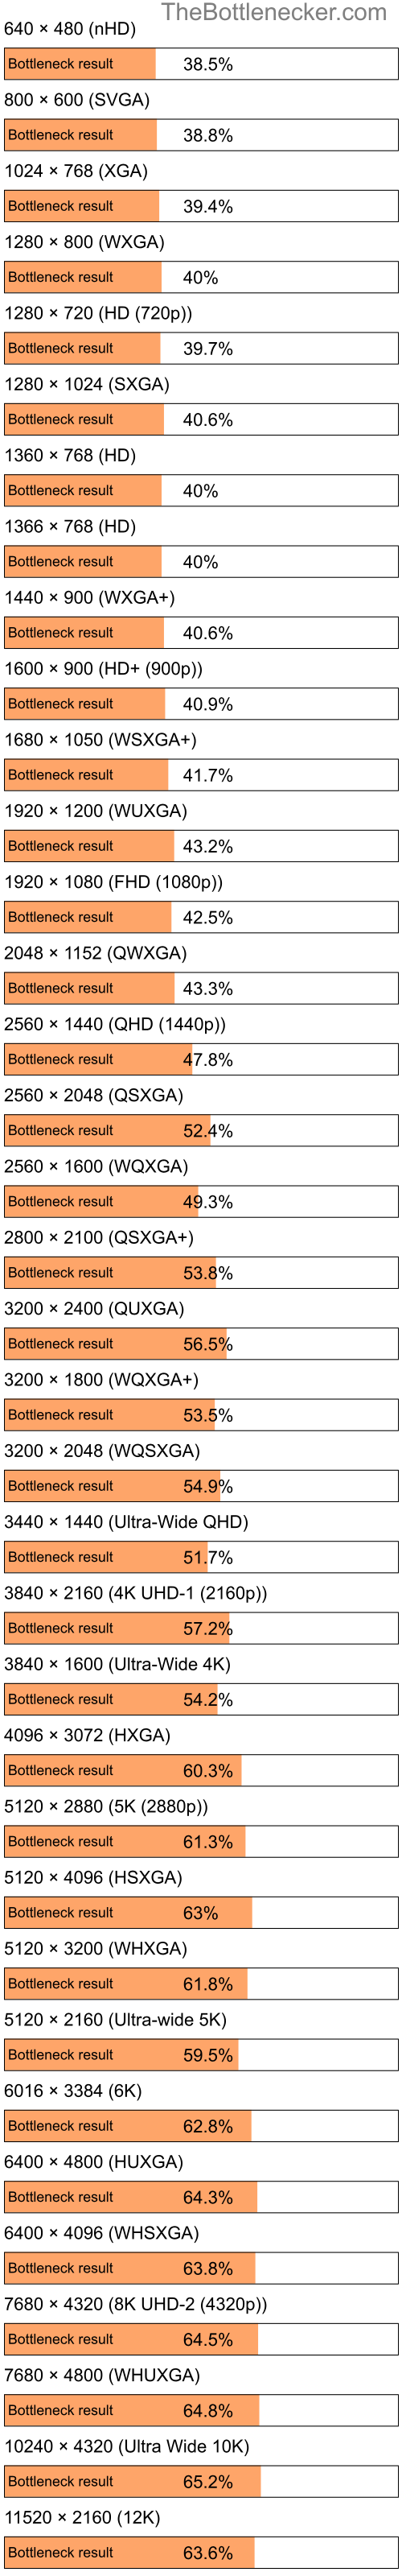 Bottleneck results by resolution for Intel Core i7-13700K and NVIDIA GeForce GTX 1650 in Graphic Card Intense Tasks